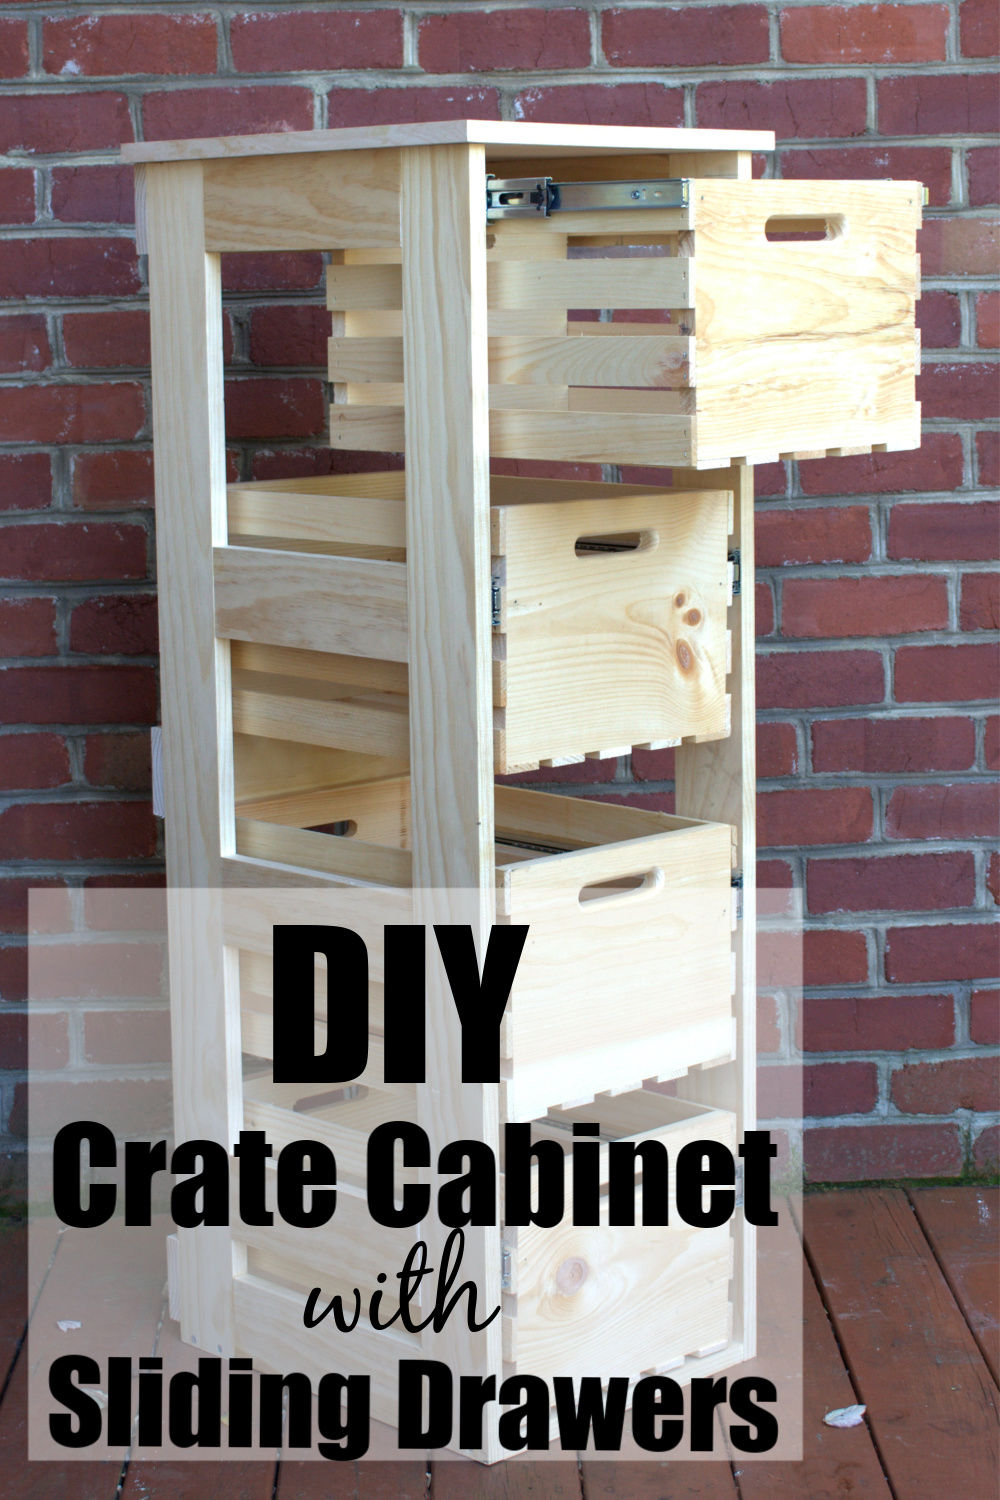 Crate cabinet made from wood crates from Home Depot.